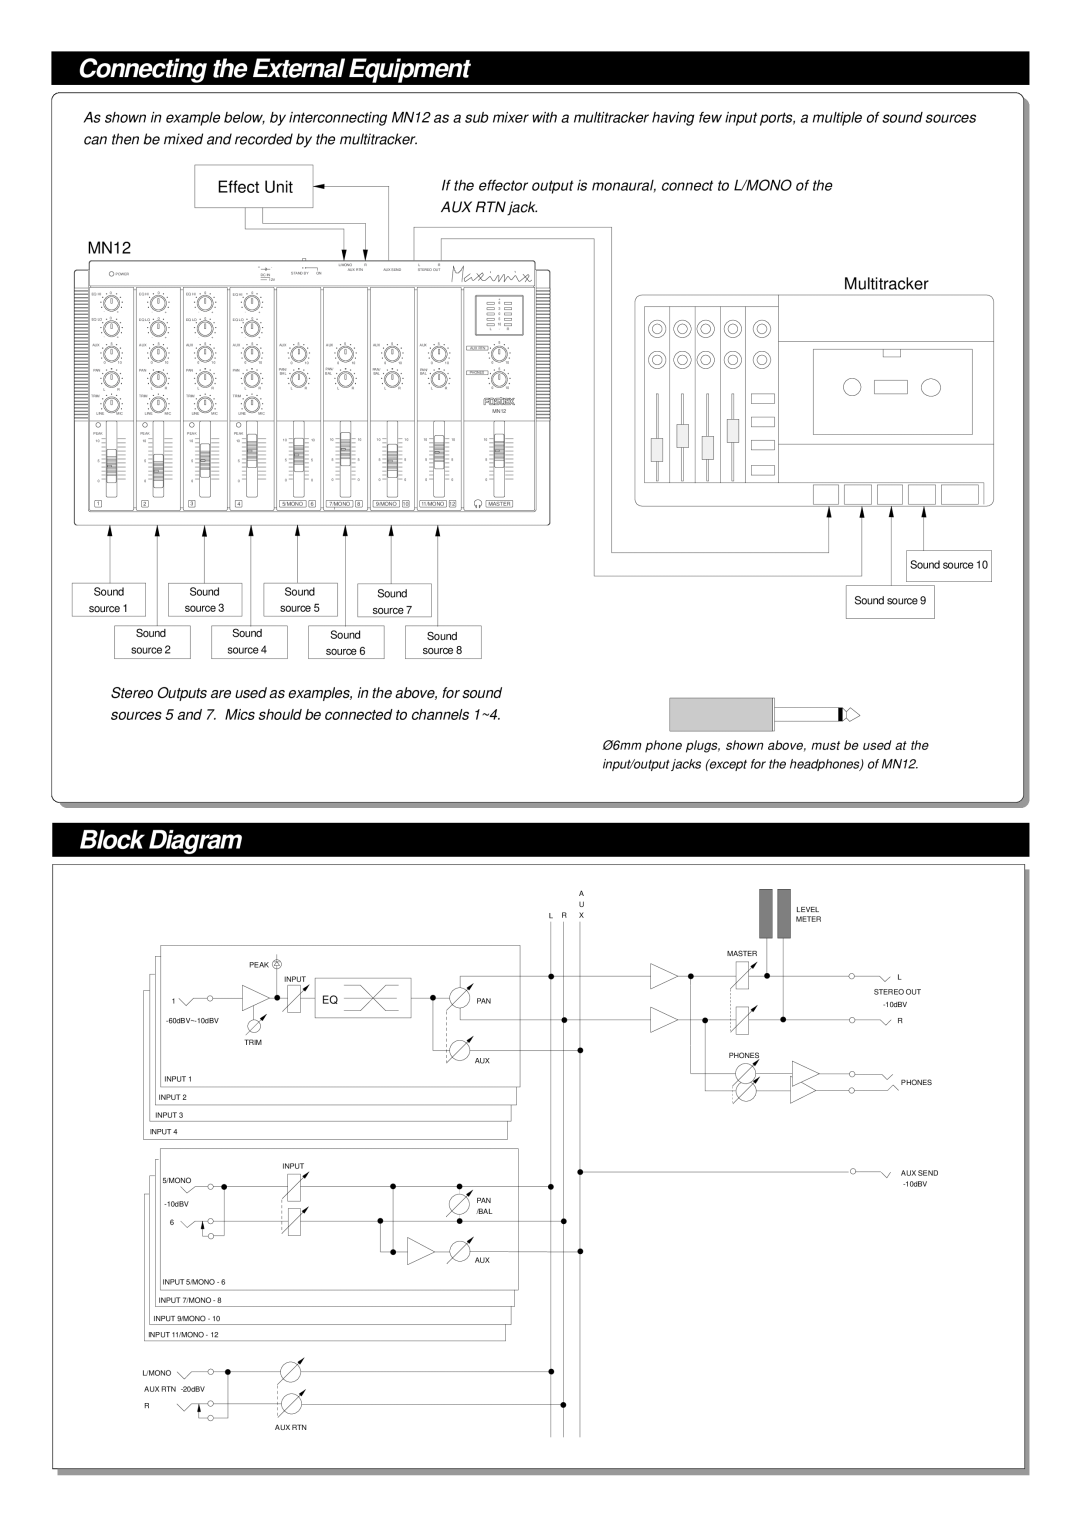 Fostex MN12 owner manual Connecting the External Equipment, Block Diagram, Effect Unit, Multitracker 